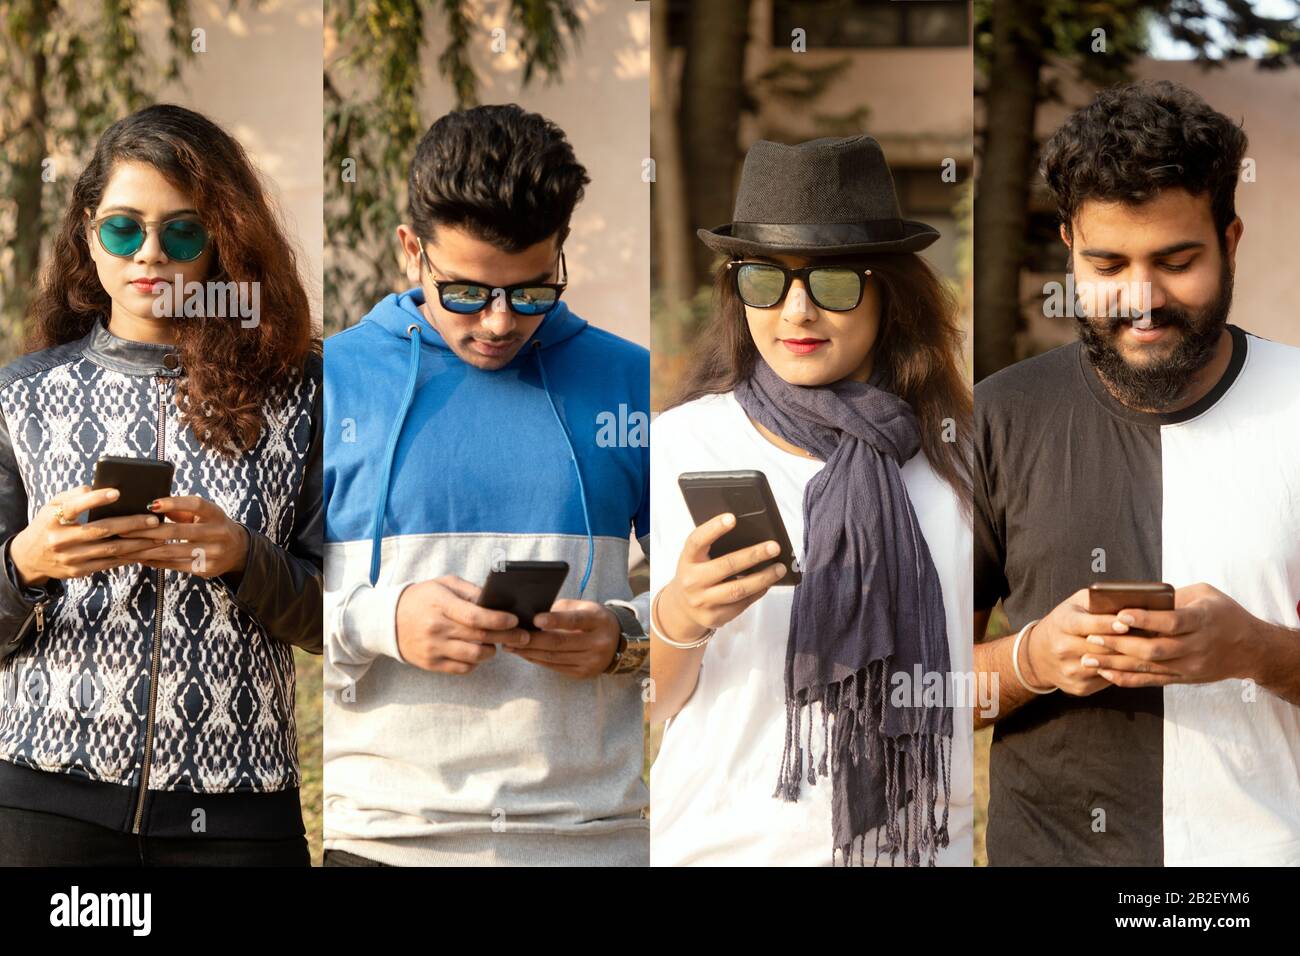 College of people busy on mobile - group of modern trendy millennials using smartphone - concept of social media, internet, e commerce, technology Stock Photo